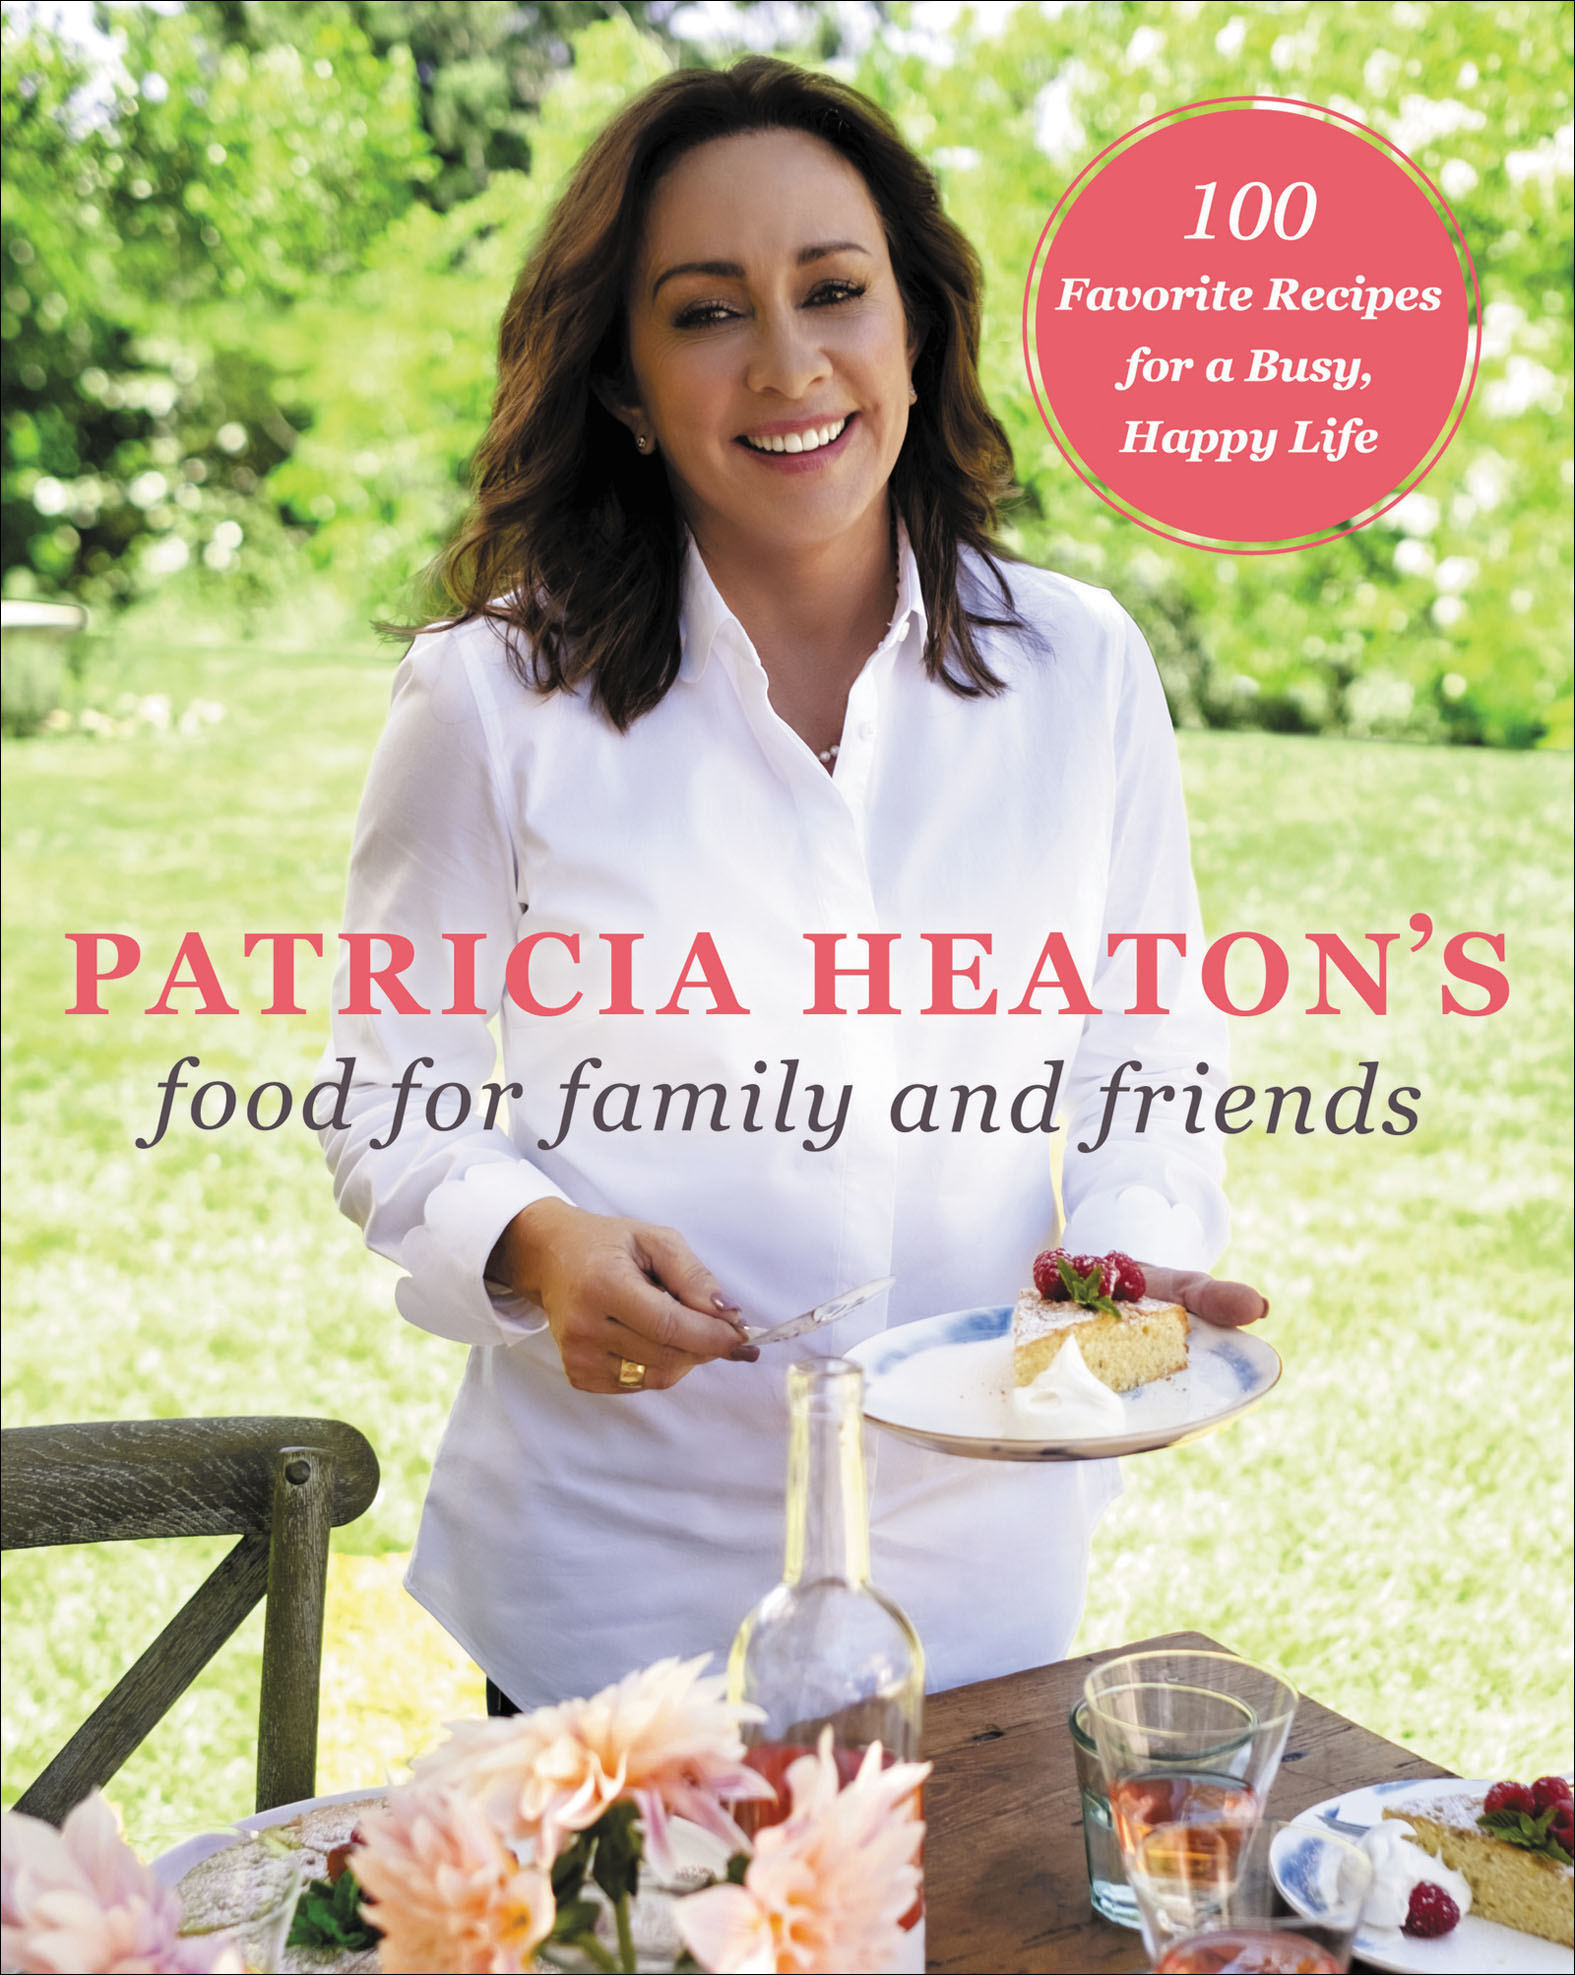 Patricia Heaton's food for family and friends 100 favorite recipes for a busy, happy life cover image